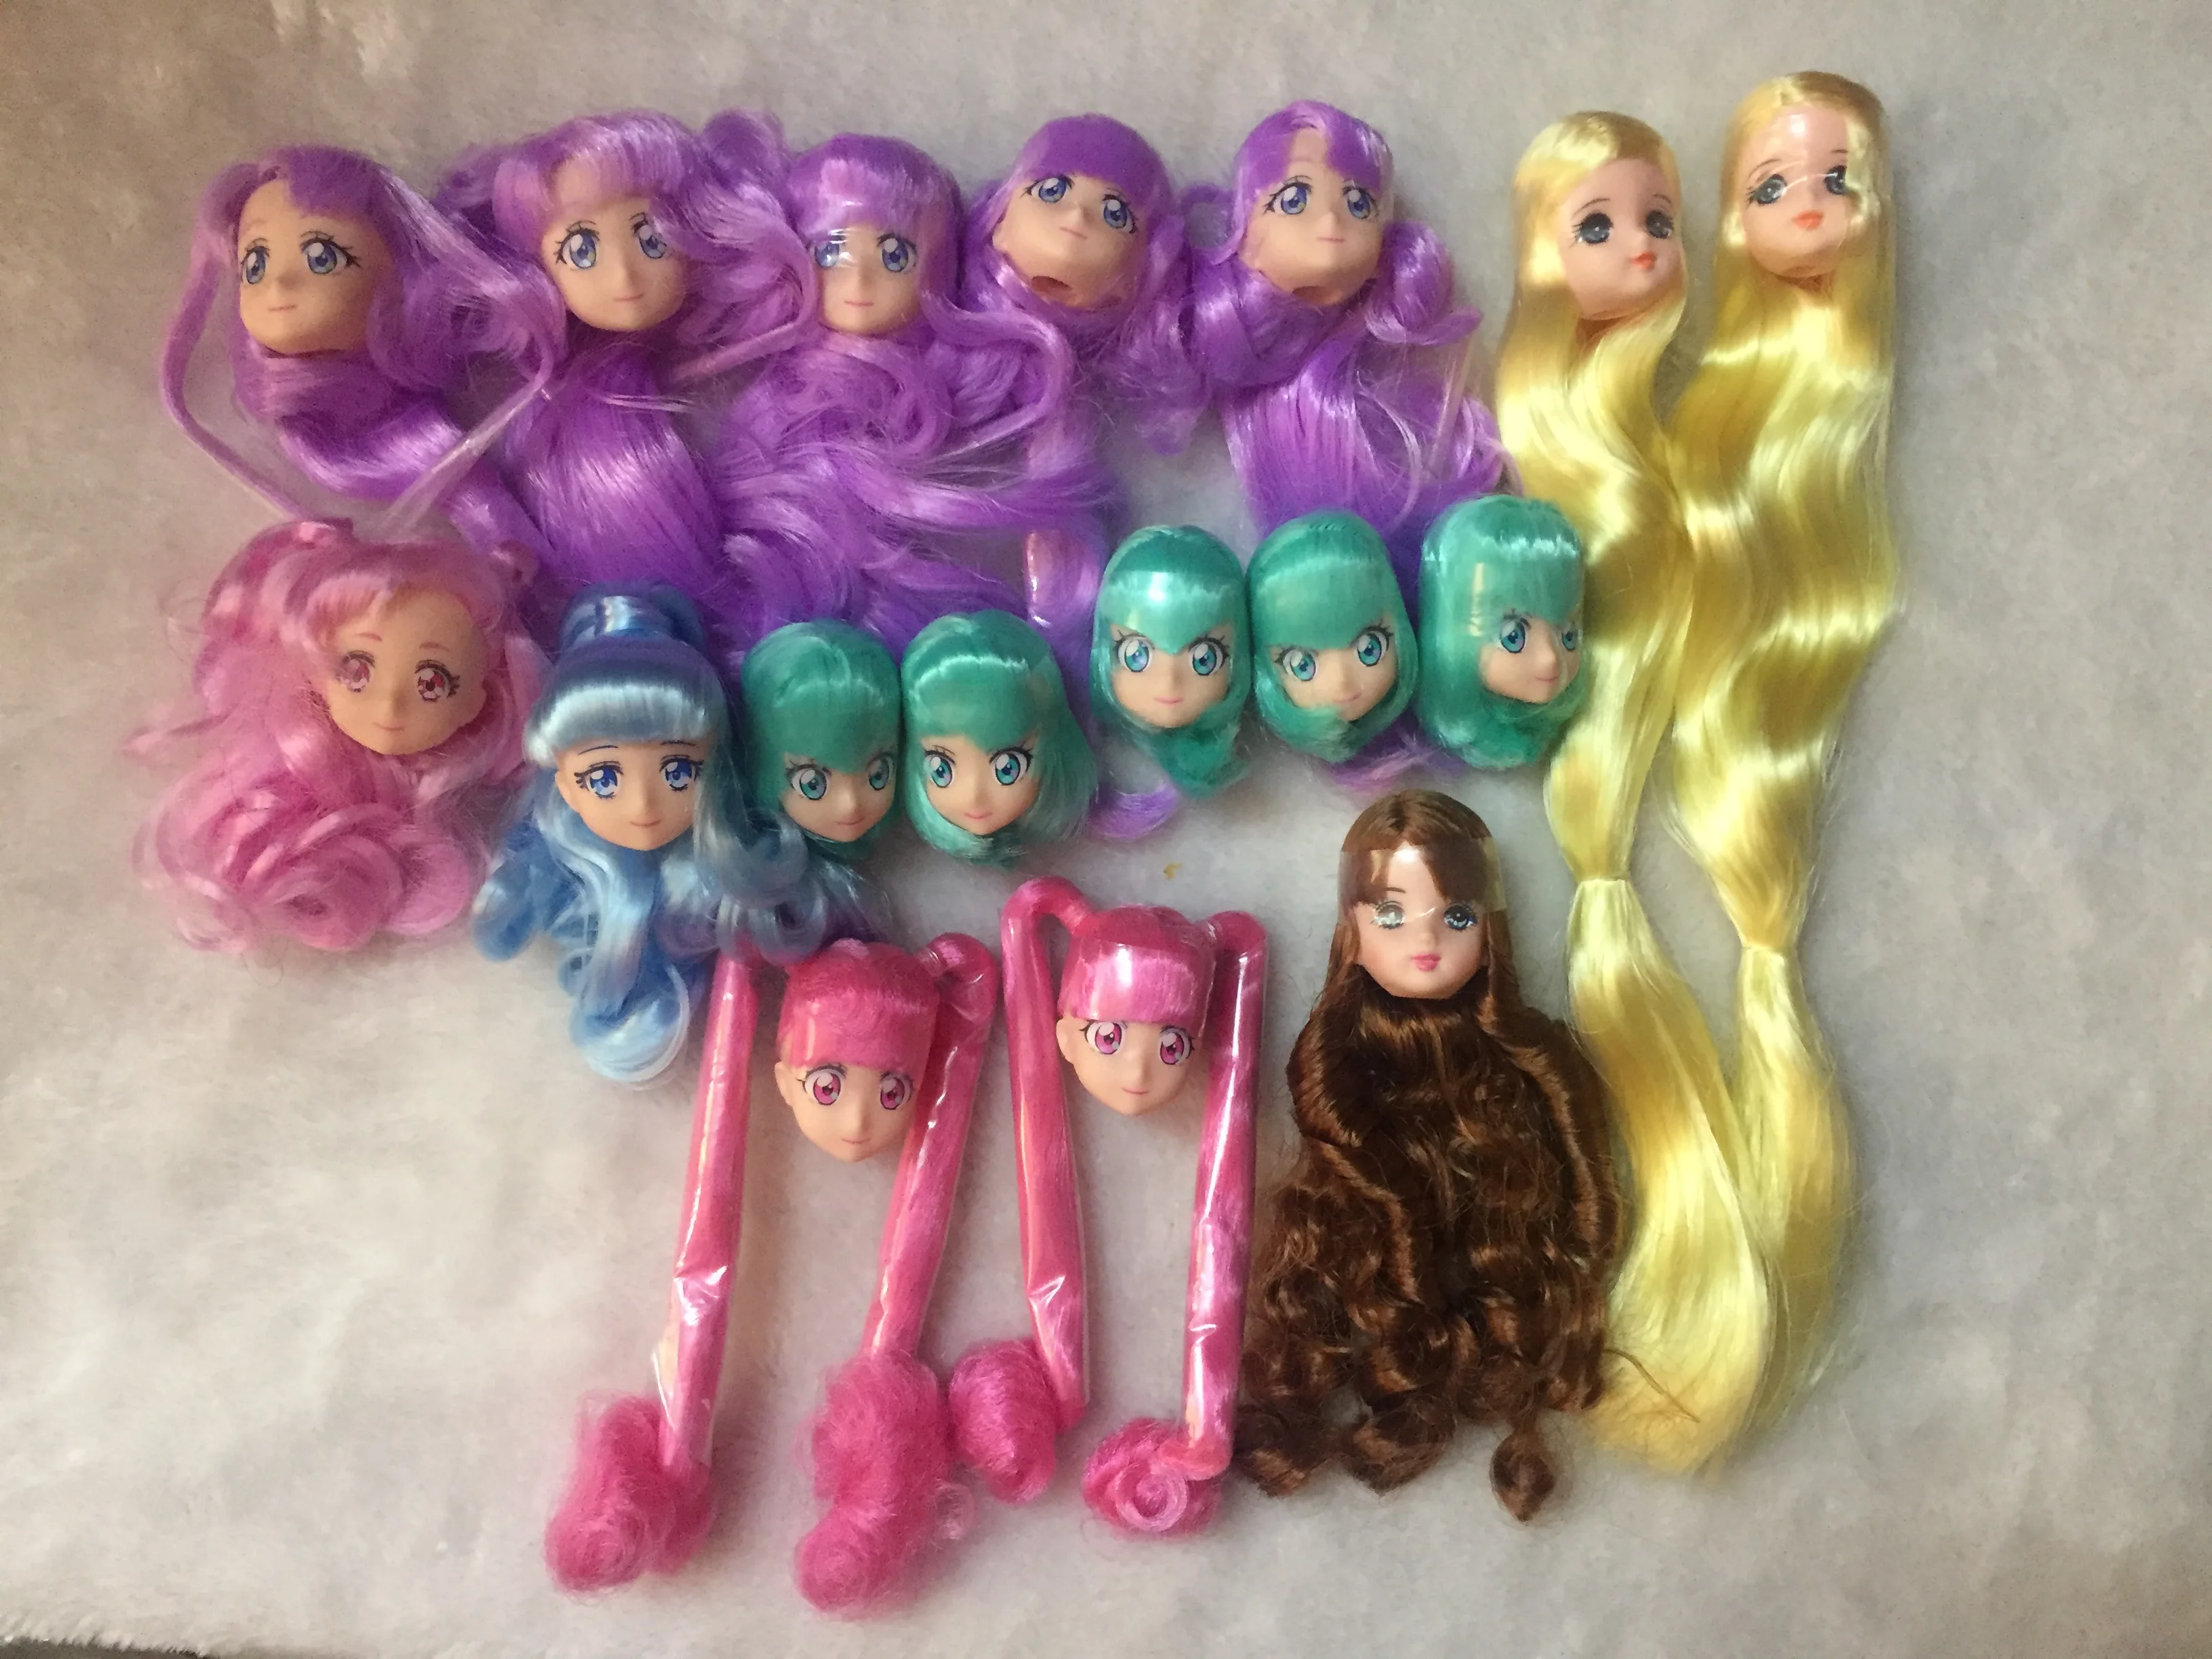 Long Hair Licca Doll Heads Short Long Curve Hair Soft Gold Black Yellow Hair Doll Heads Boy Girl Doll Parts DIY Accessories Toy long handle pizza oven brush barbecue grill brush with scraper 2 in 1 pizza oven brushes with wire brush heads for cooking